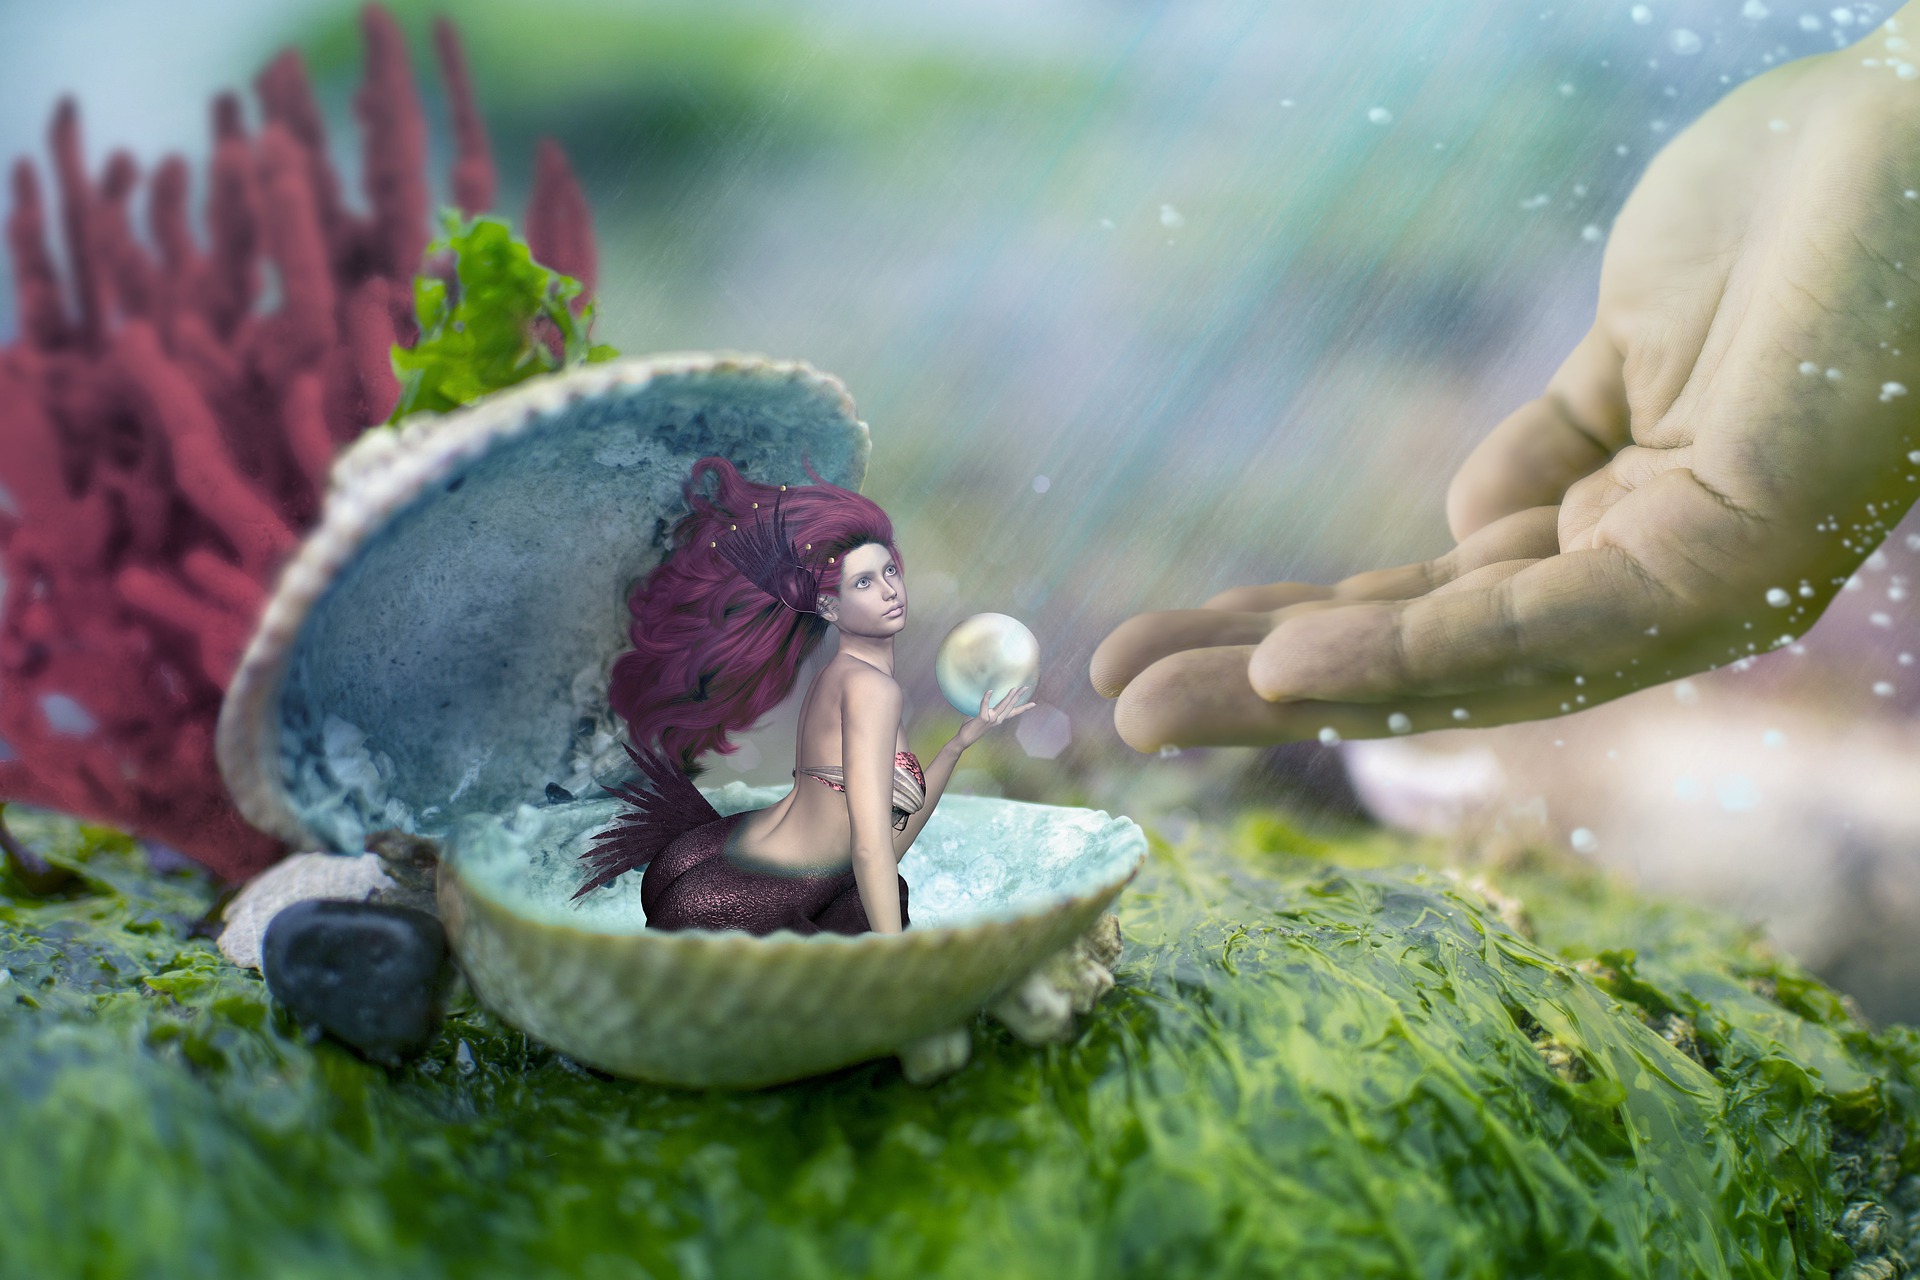 Mermaid in a shell with pearl and open hand coming towards her